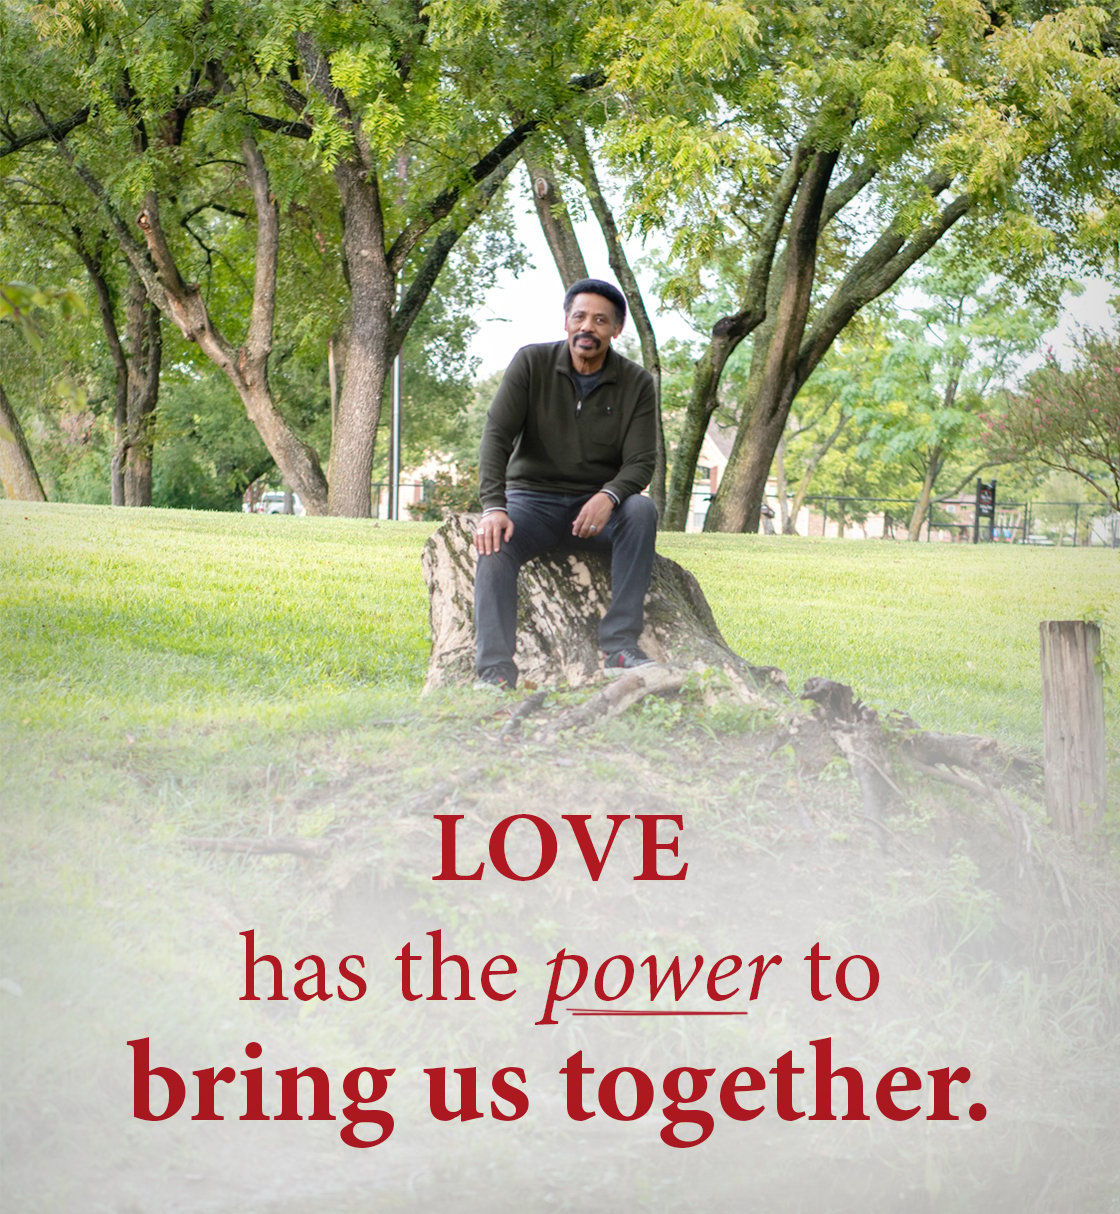 Love has the power to bring us together